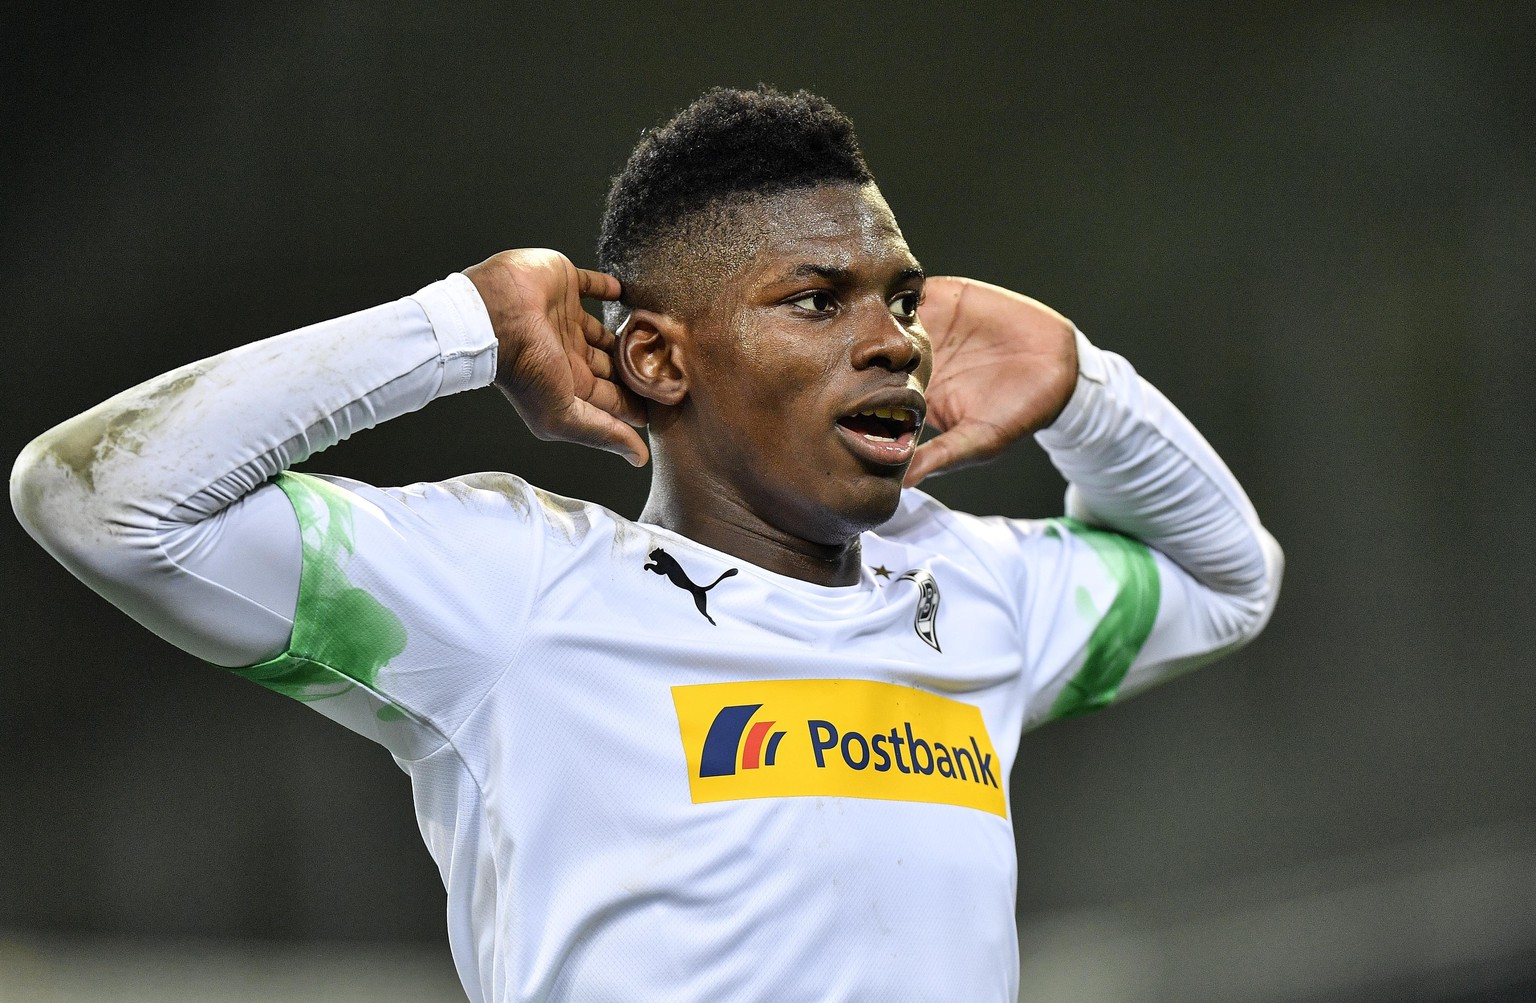 Moenchengladbach&#039;s Breel Embolo celebrates after he scored the opening goal during the German Bundesliga soccer match between Borussia Moenchengladbach and 1.FC Cologne in Moenchengladbach, Germa ...